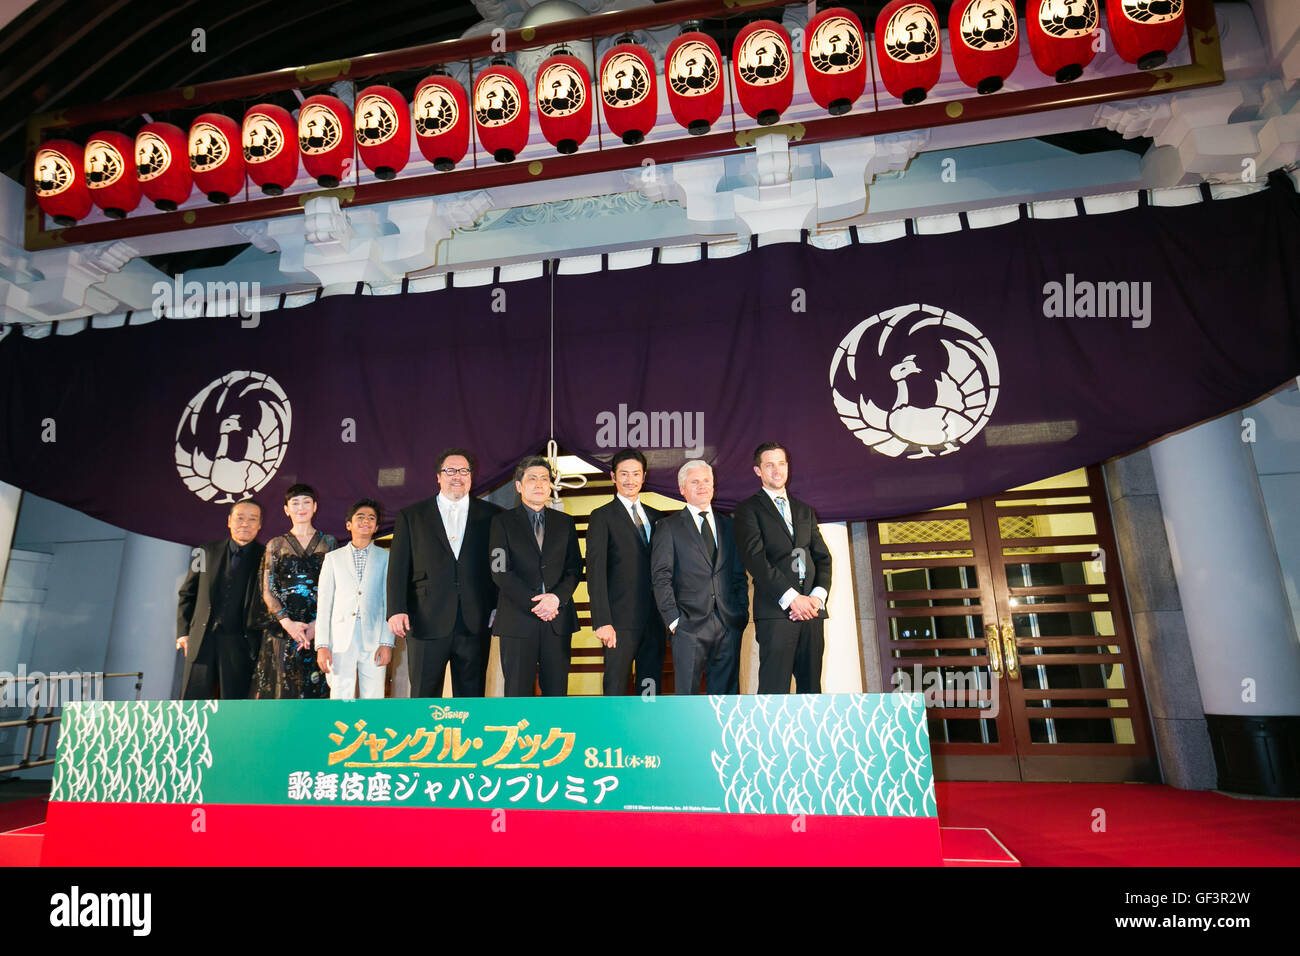 Tokyo, Japan. 27th July, 2016.(L to R) Actor Toshiyuki Nishida, actress Rie Miyazawa, child actor Neel Sethi, director Jon Favreau, kabuki actor Matsumoto Koshiro IX, actor Yusuke Iseya, producer Brigham Taylor and the screenwriter Justin Marks pose for the cameras during the Japanese premiere for the film The Jungle Book at Kabuki-za theater in Ginza on July 27, 2016, Tokyo, Japan. Sethi, Favreau, Taylor and Japanese voice cast appeared on the stage to greet the fans. The movie will be released in Japan on August 11. Credit:  Rodrigo Reyes Marin/AFLO/Alamy Live News Stock Photo